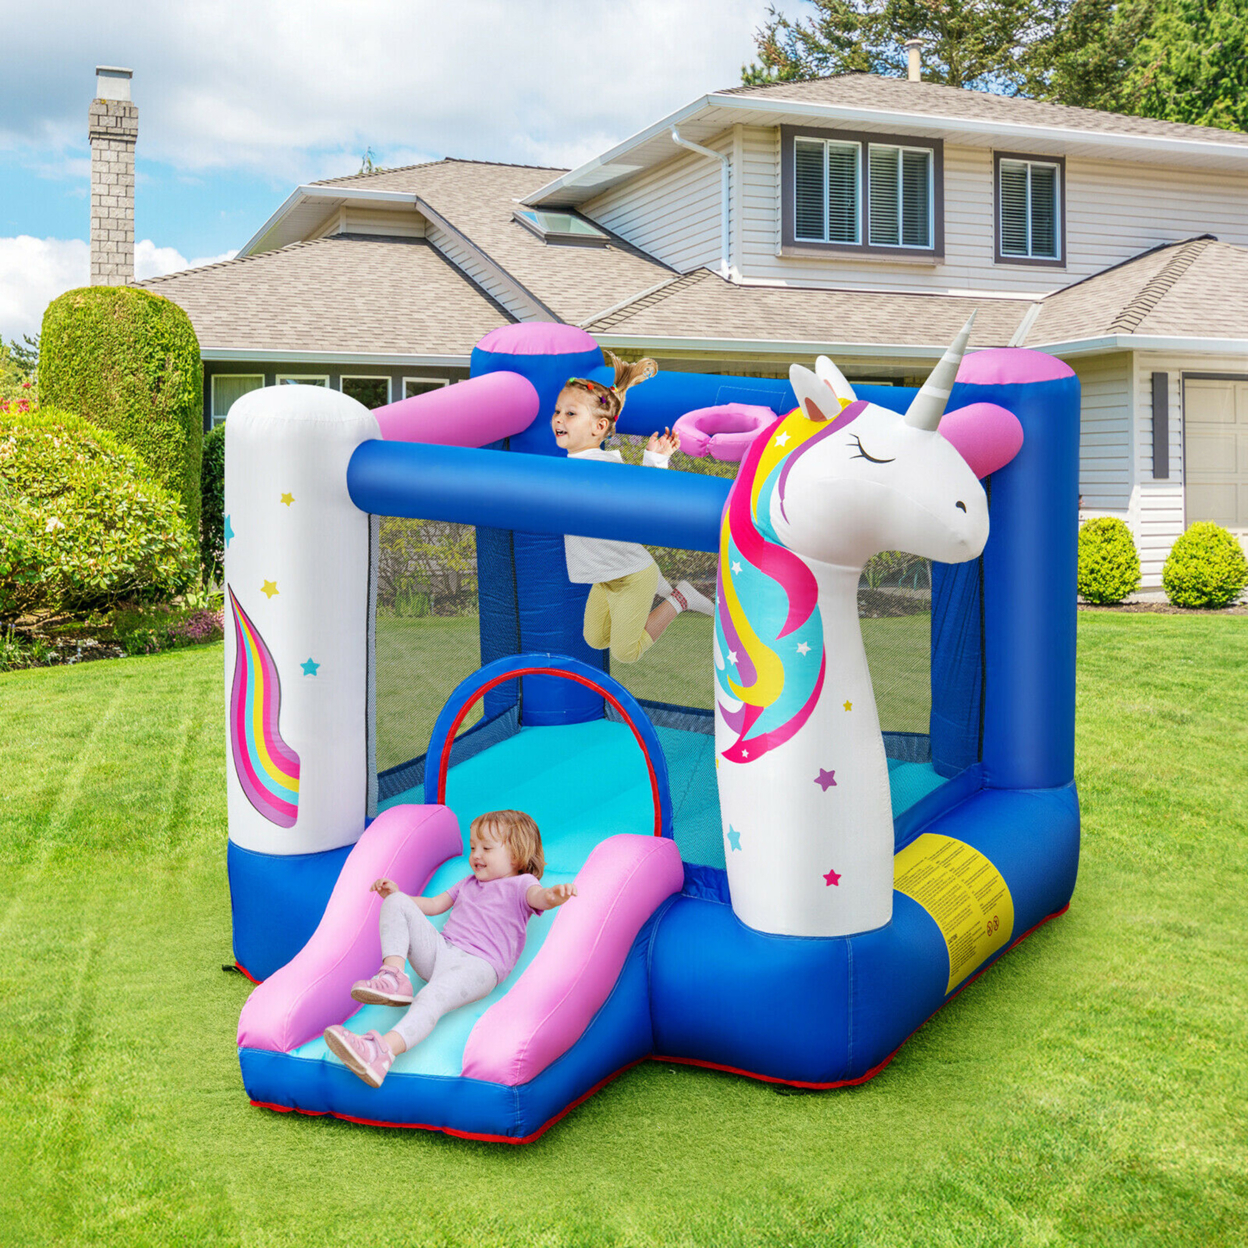 Slide Bouncer Inflatable Jumping Castle Basketball Game Without Blower